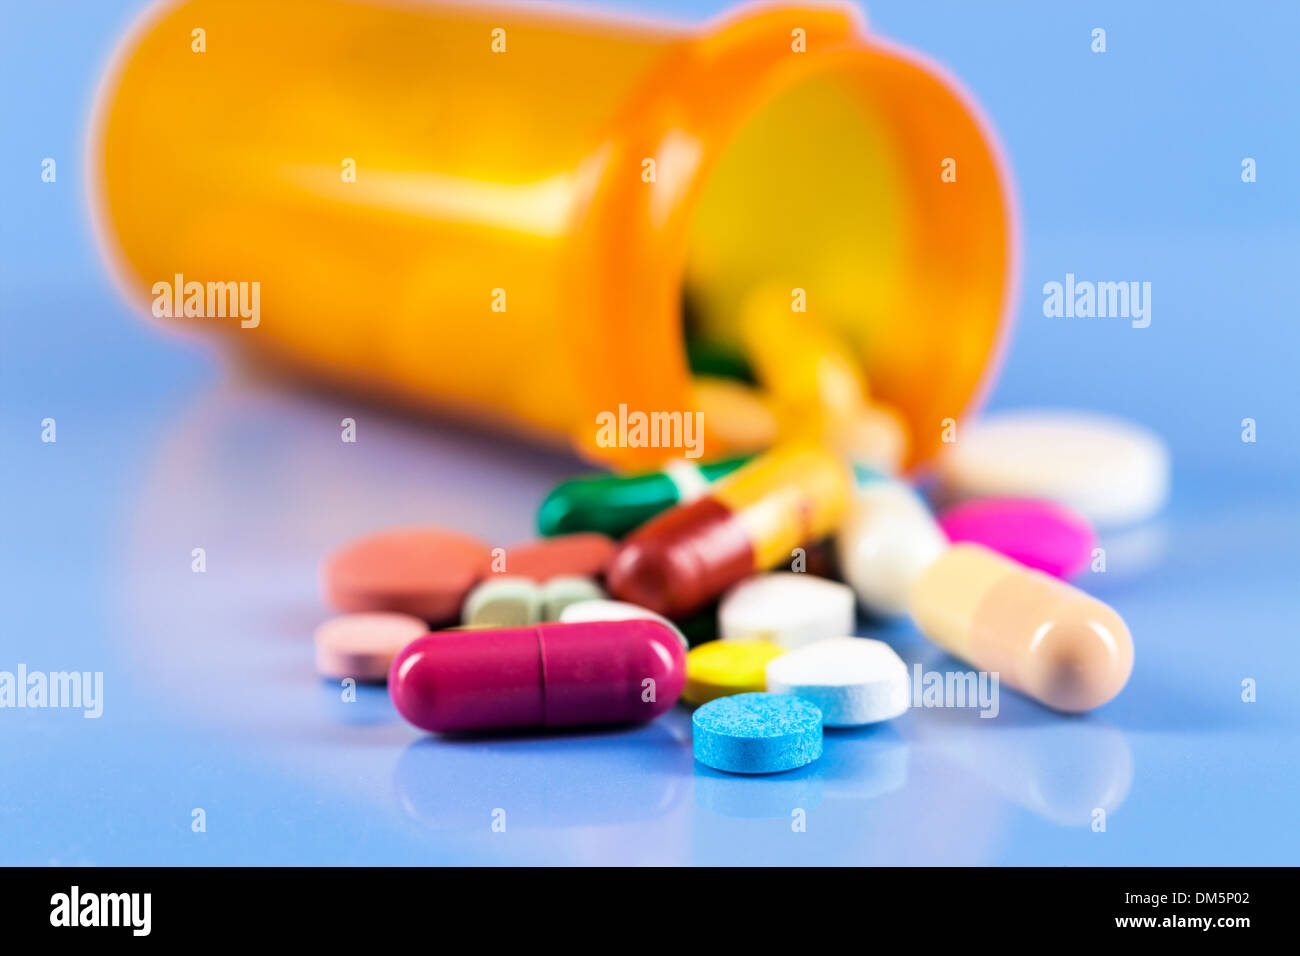 vial with medical drugs Stock Photo